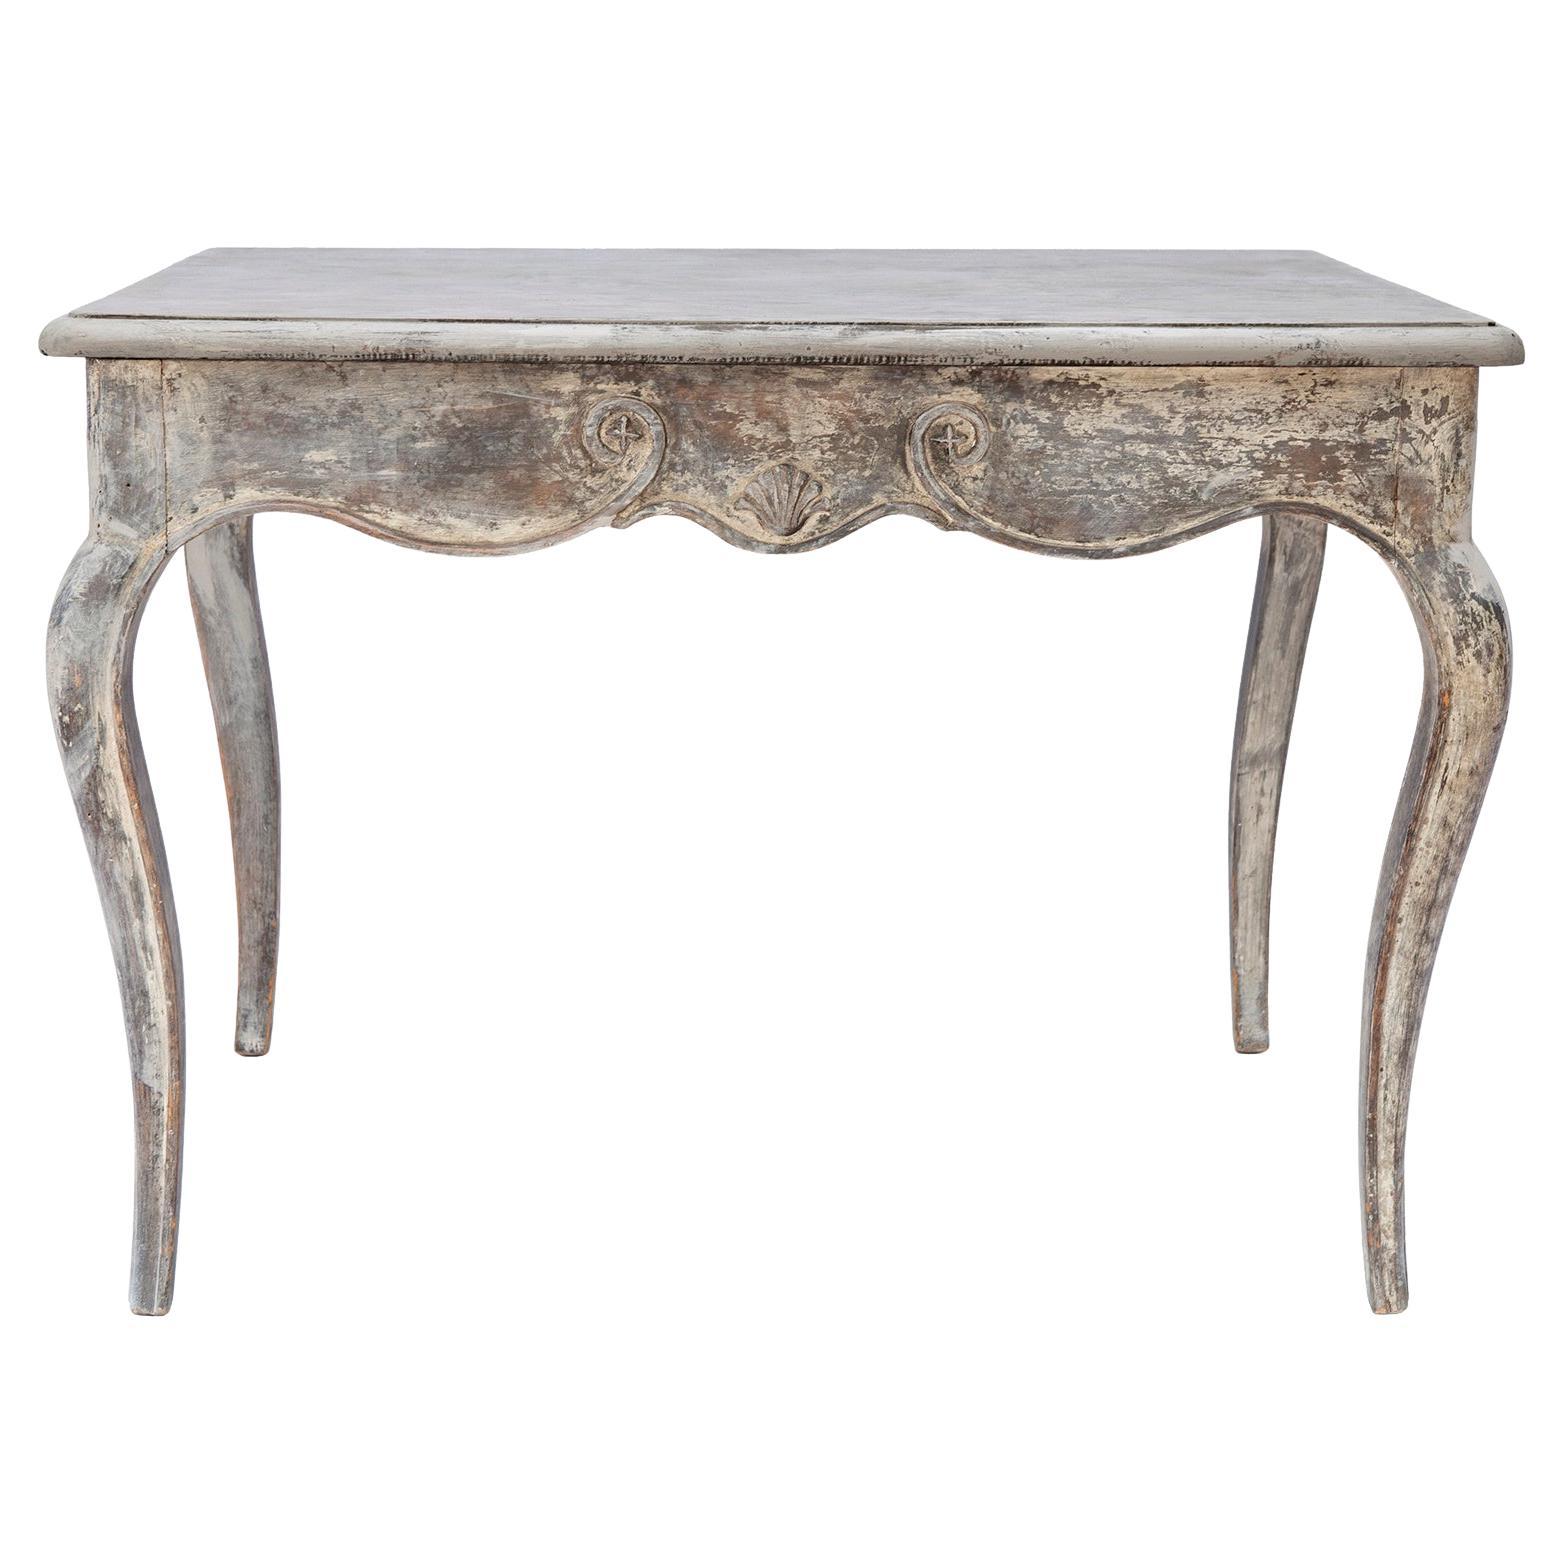 Rustic French Provincial Style Side Table For Sale